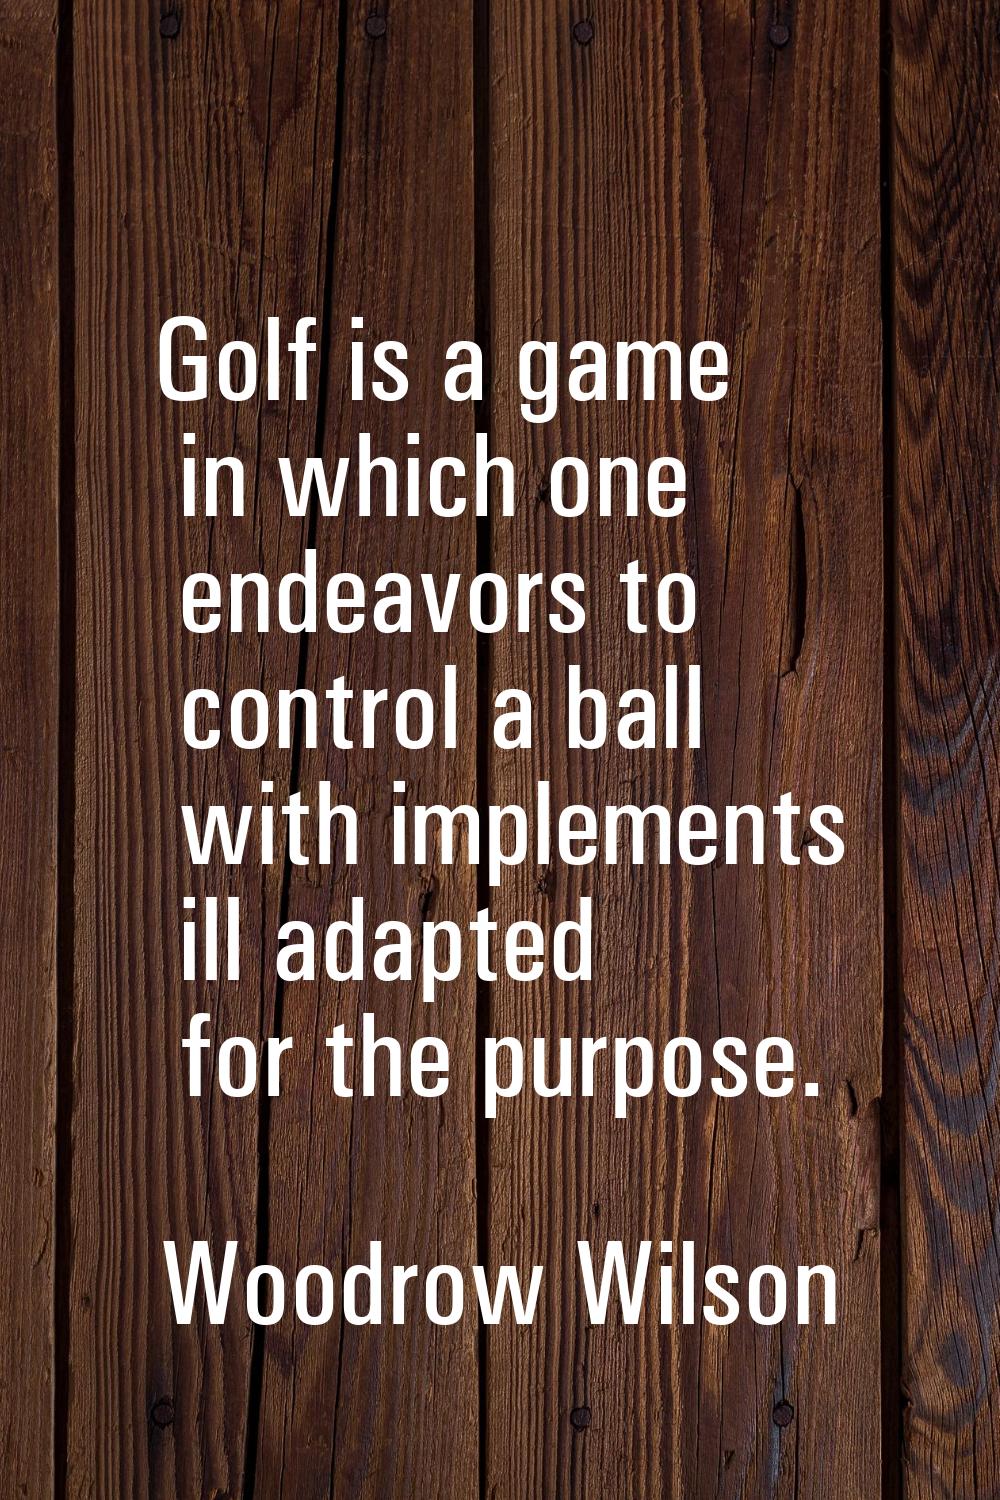 Golf is a game in which one endeavors to control a ball with implements ill adapted for the purpose